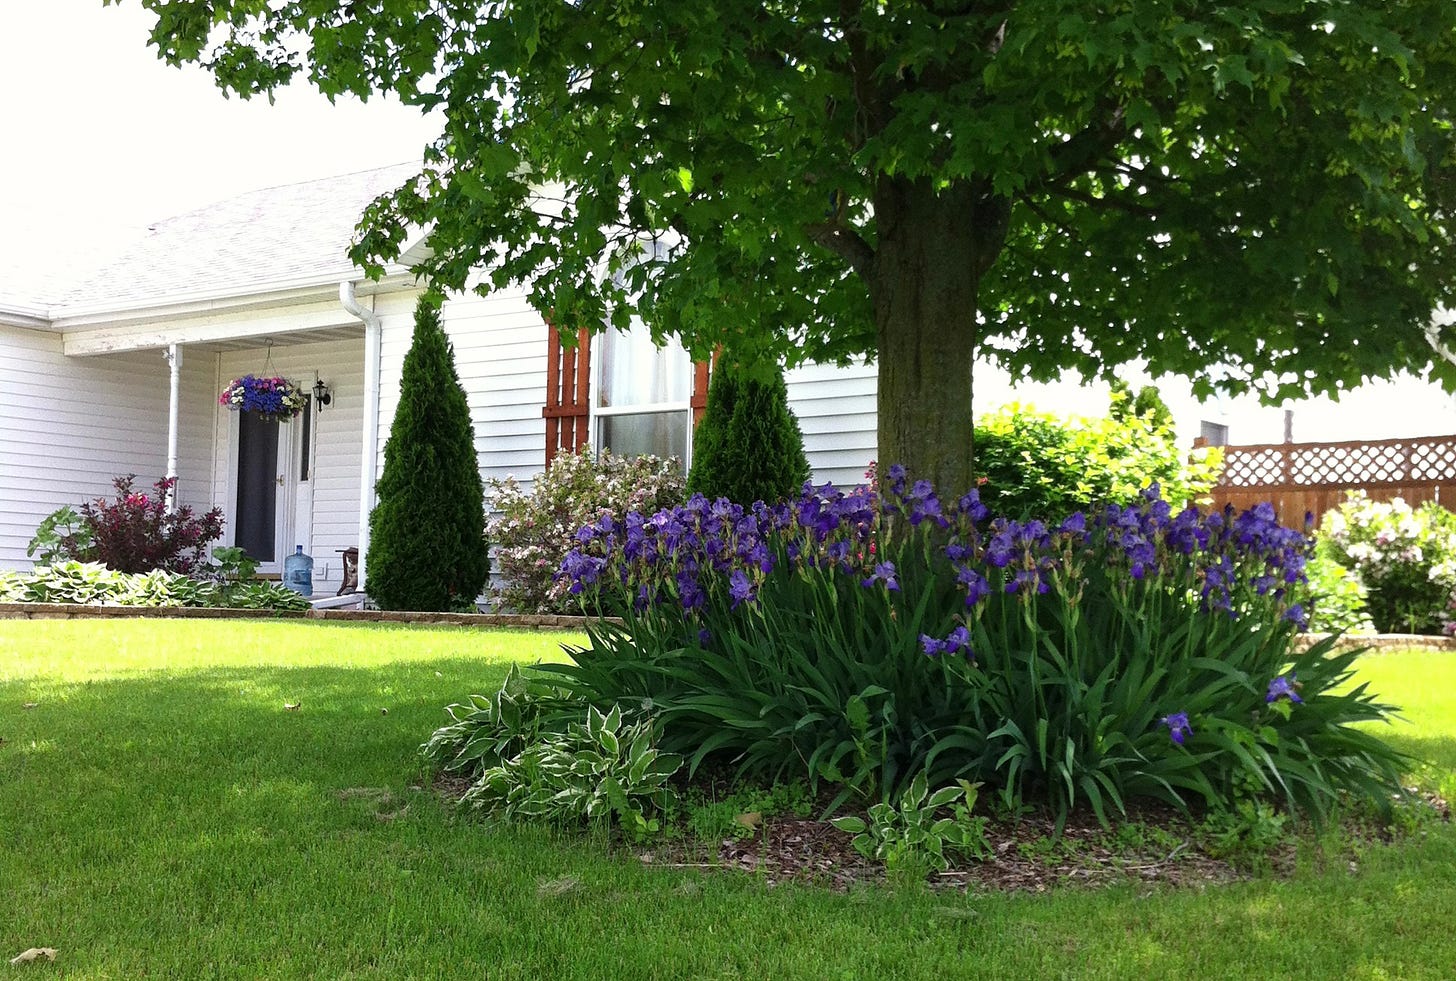 View of the front of a white house with a tree in the yard surrounded by irises.